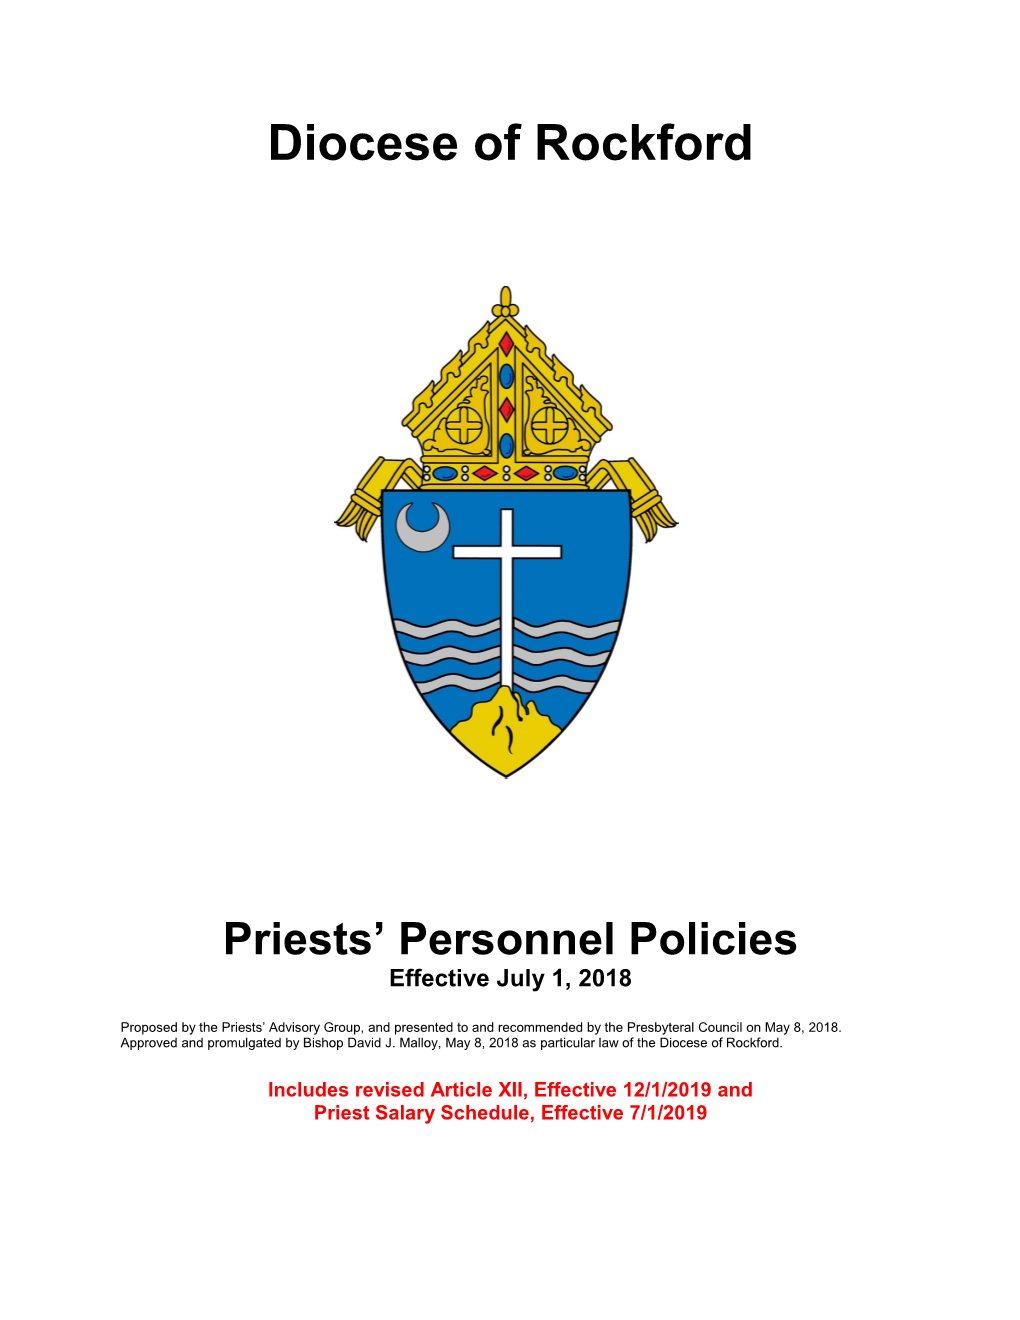 Diocese of Rockford Priests' Personnel Policies